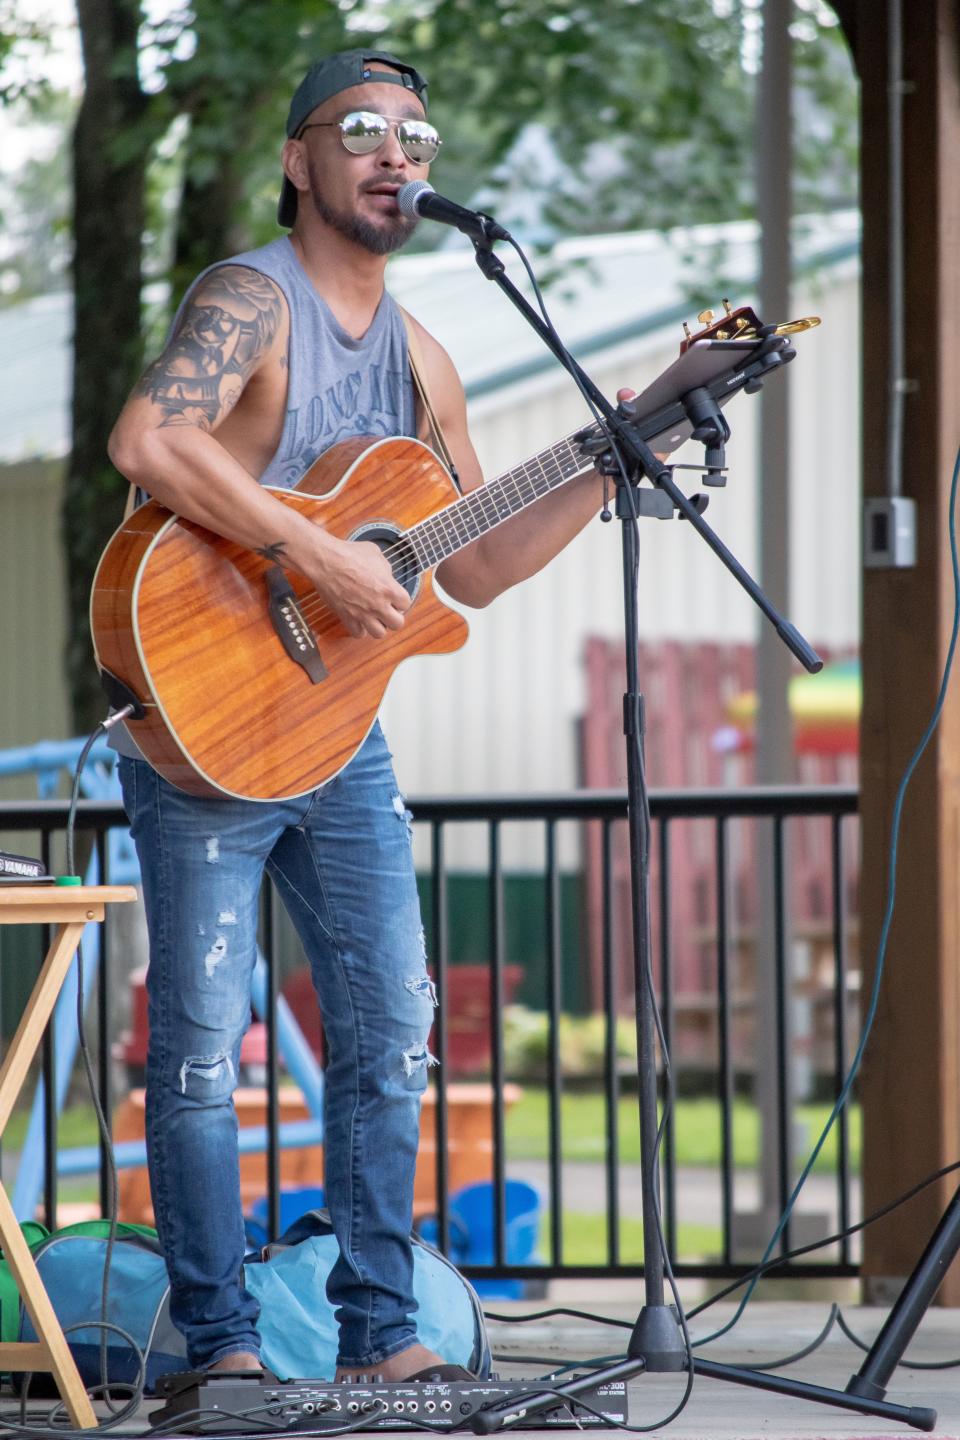 E. Wade Acoustics, who previously performed in Byesville Park, will be at Georgetown Vineyards on Thursday.